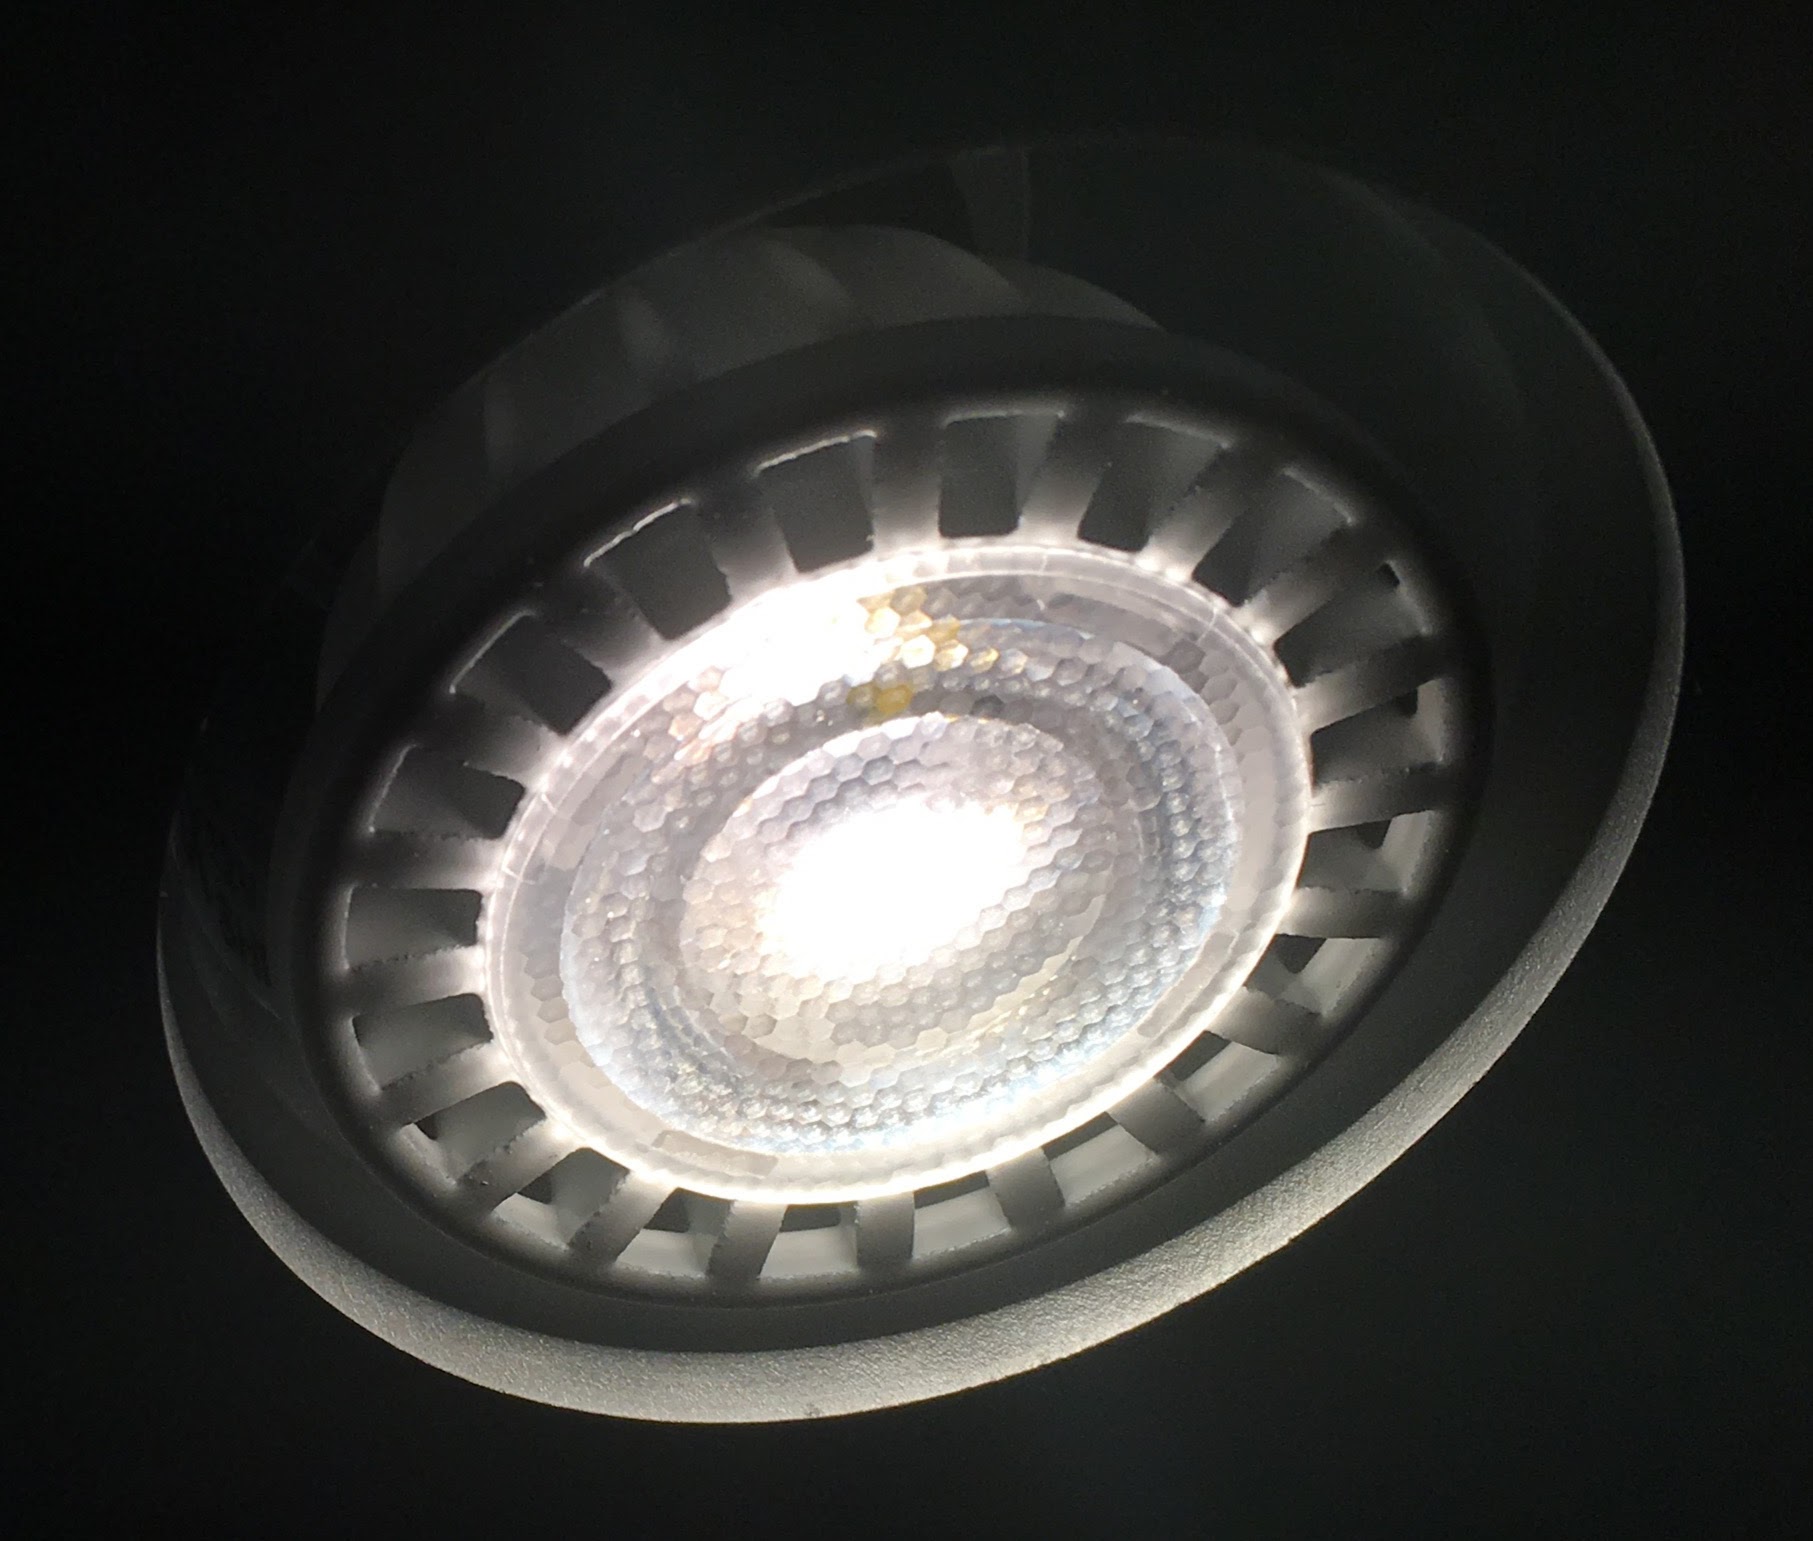 Ikea Lighting To Led Bulbs, Can I Replace Halogen Track Lights With Led